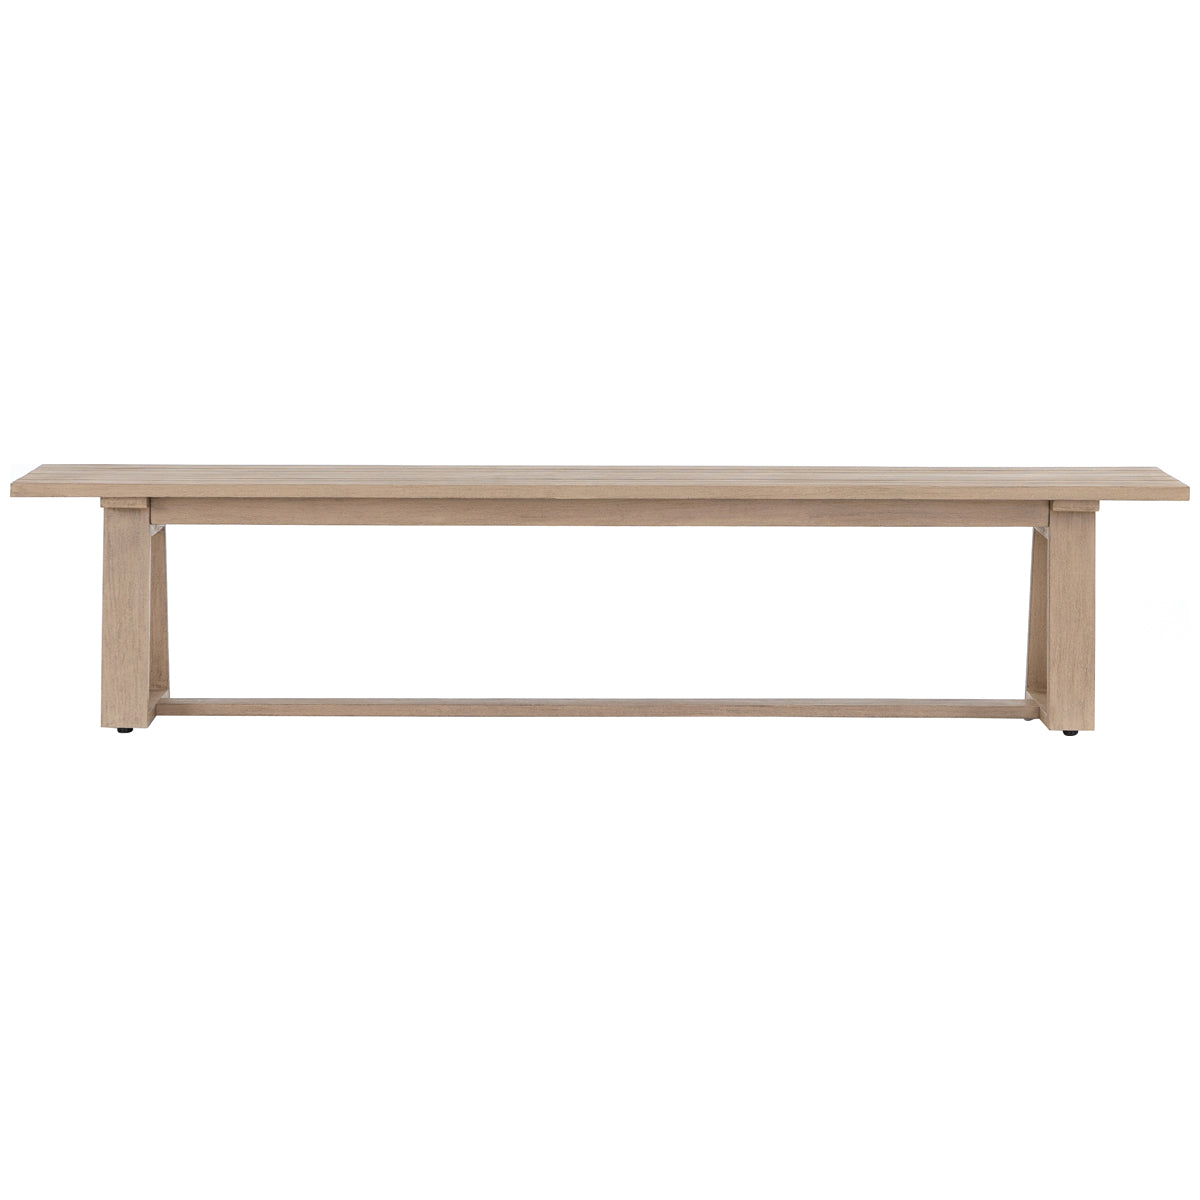 Four Hands Solano Atherton Outdoor Dining Bench